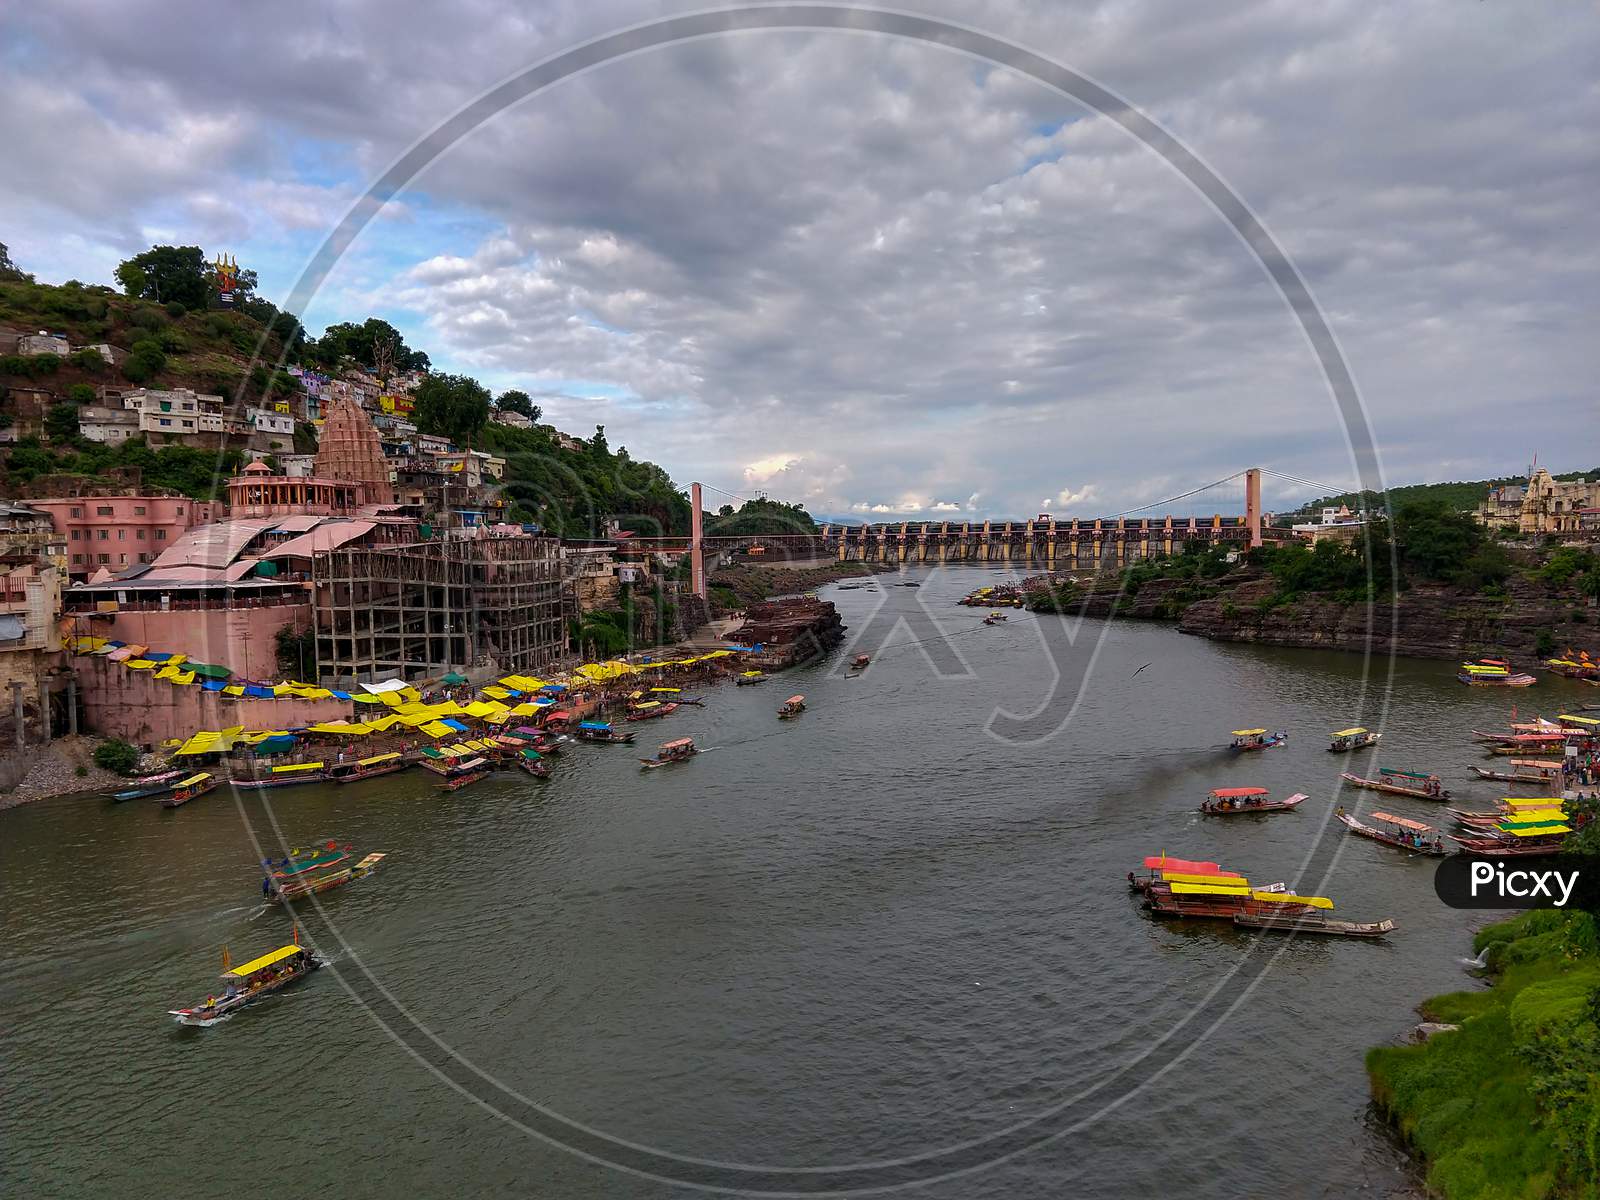 Famous Omkareshwar Jyotirling Temple, Omkareshwar Dam And Holy Narmada River All Are In One Frame. Colorful Boats Are Floating In The River.